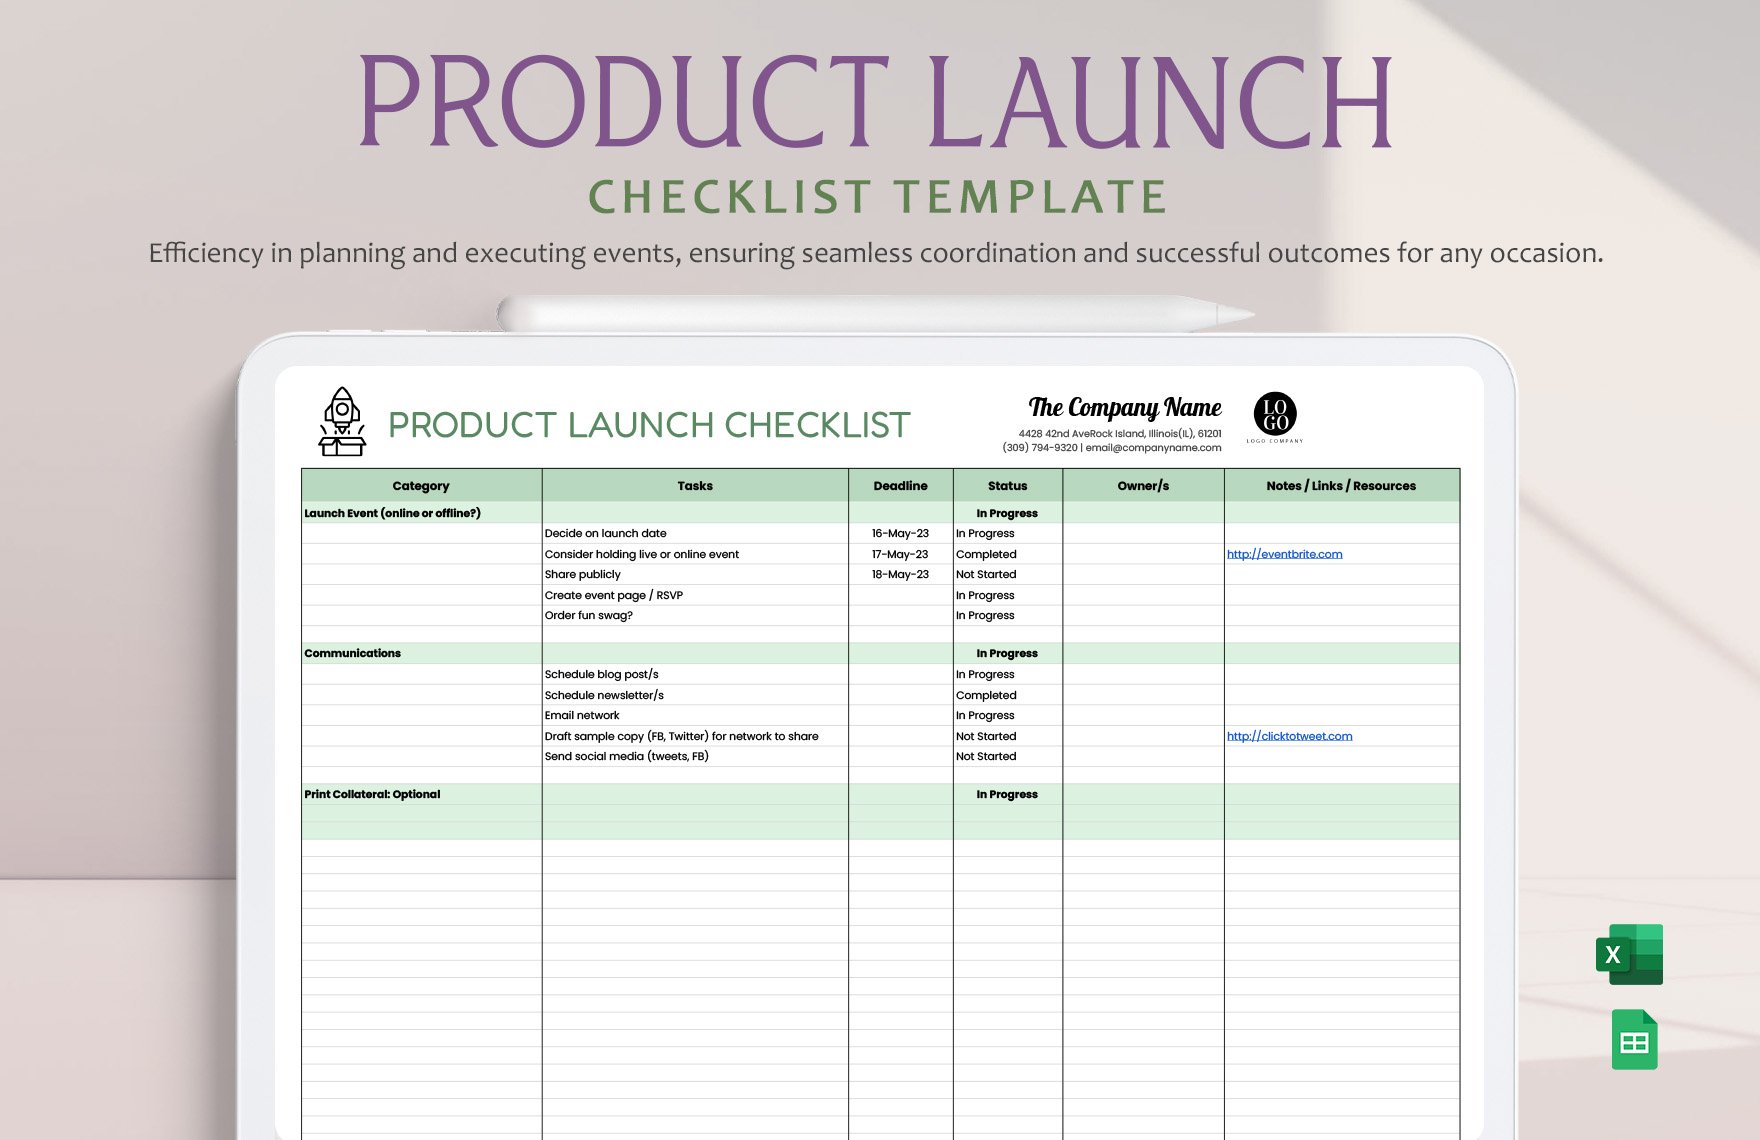 Product Launch Checklist Template in Excel, Google Sheets